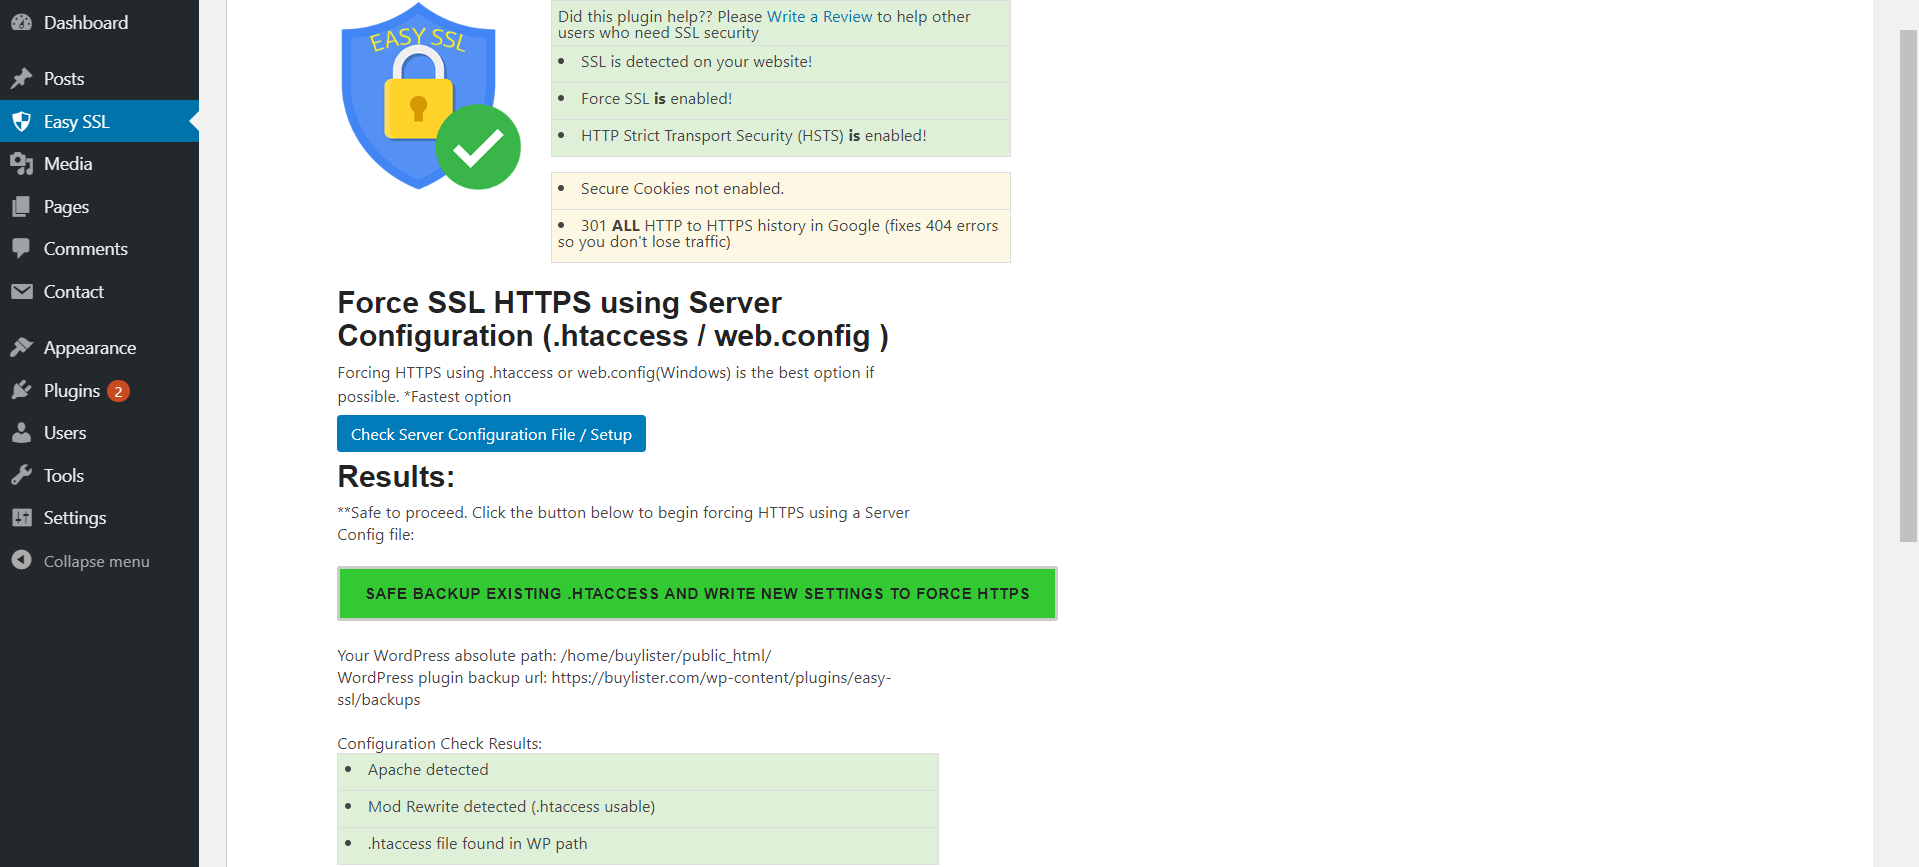 Enable HTTPS using server configuration file (.htaccess or web.config) *faster option